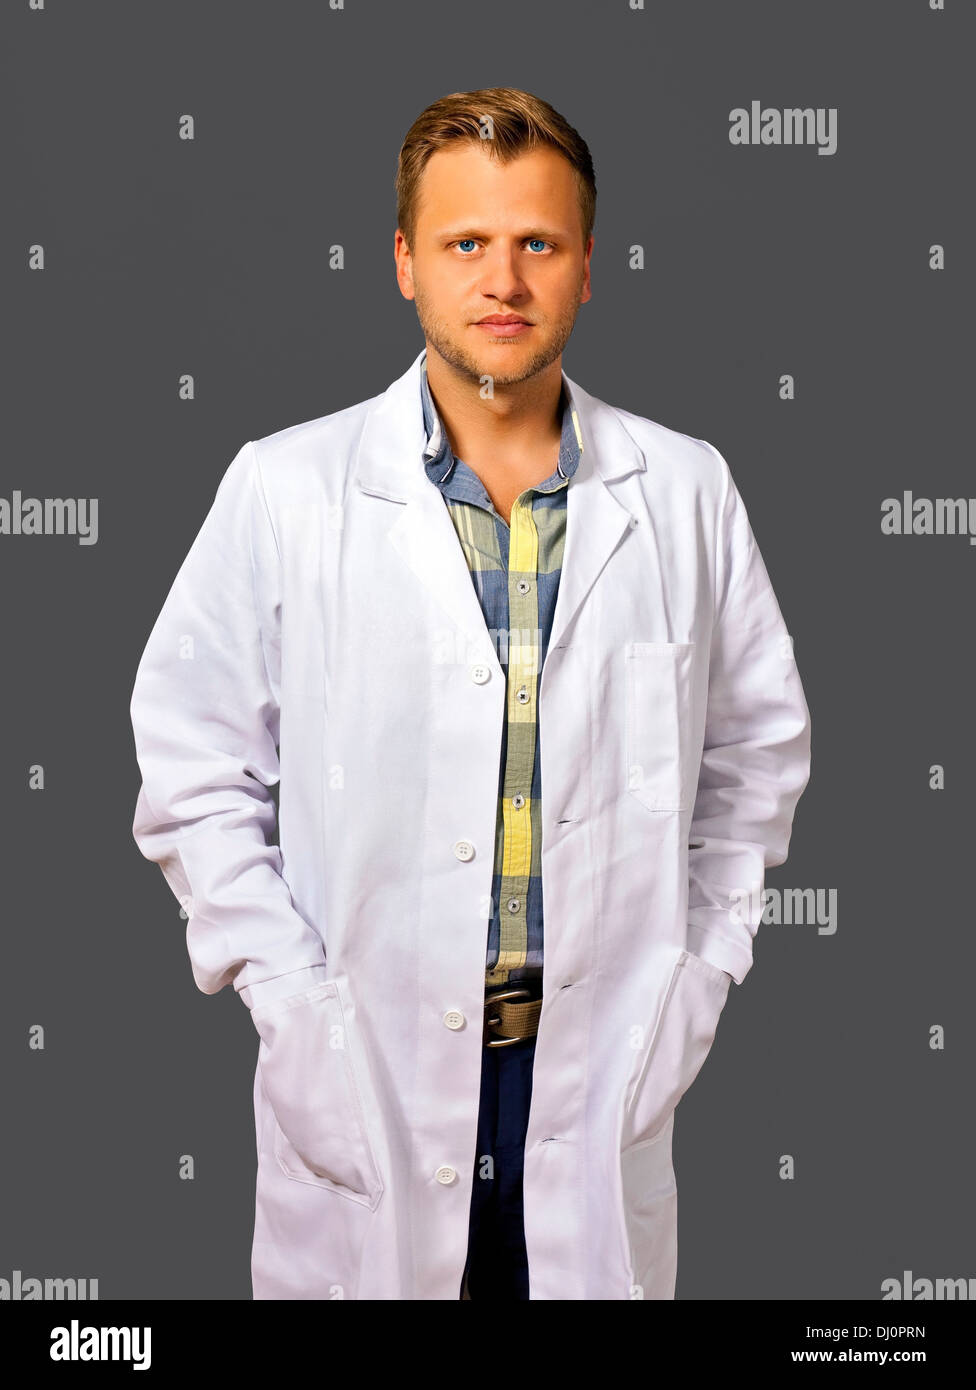 Young male scientist or doctor Stock Photo